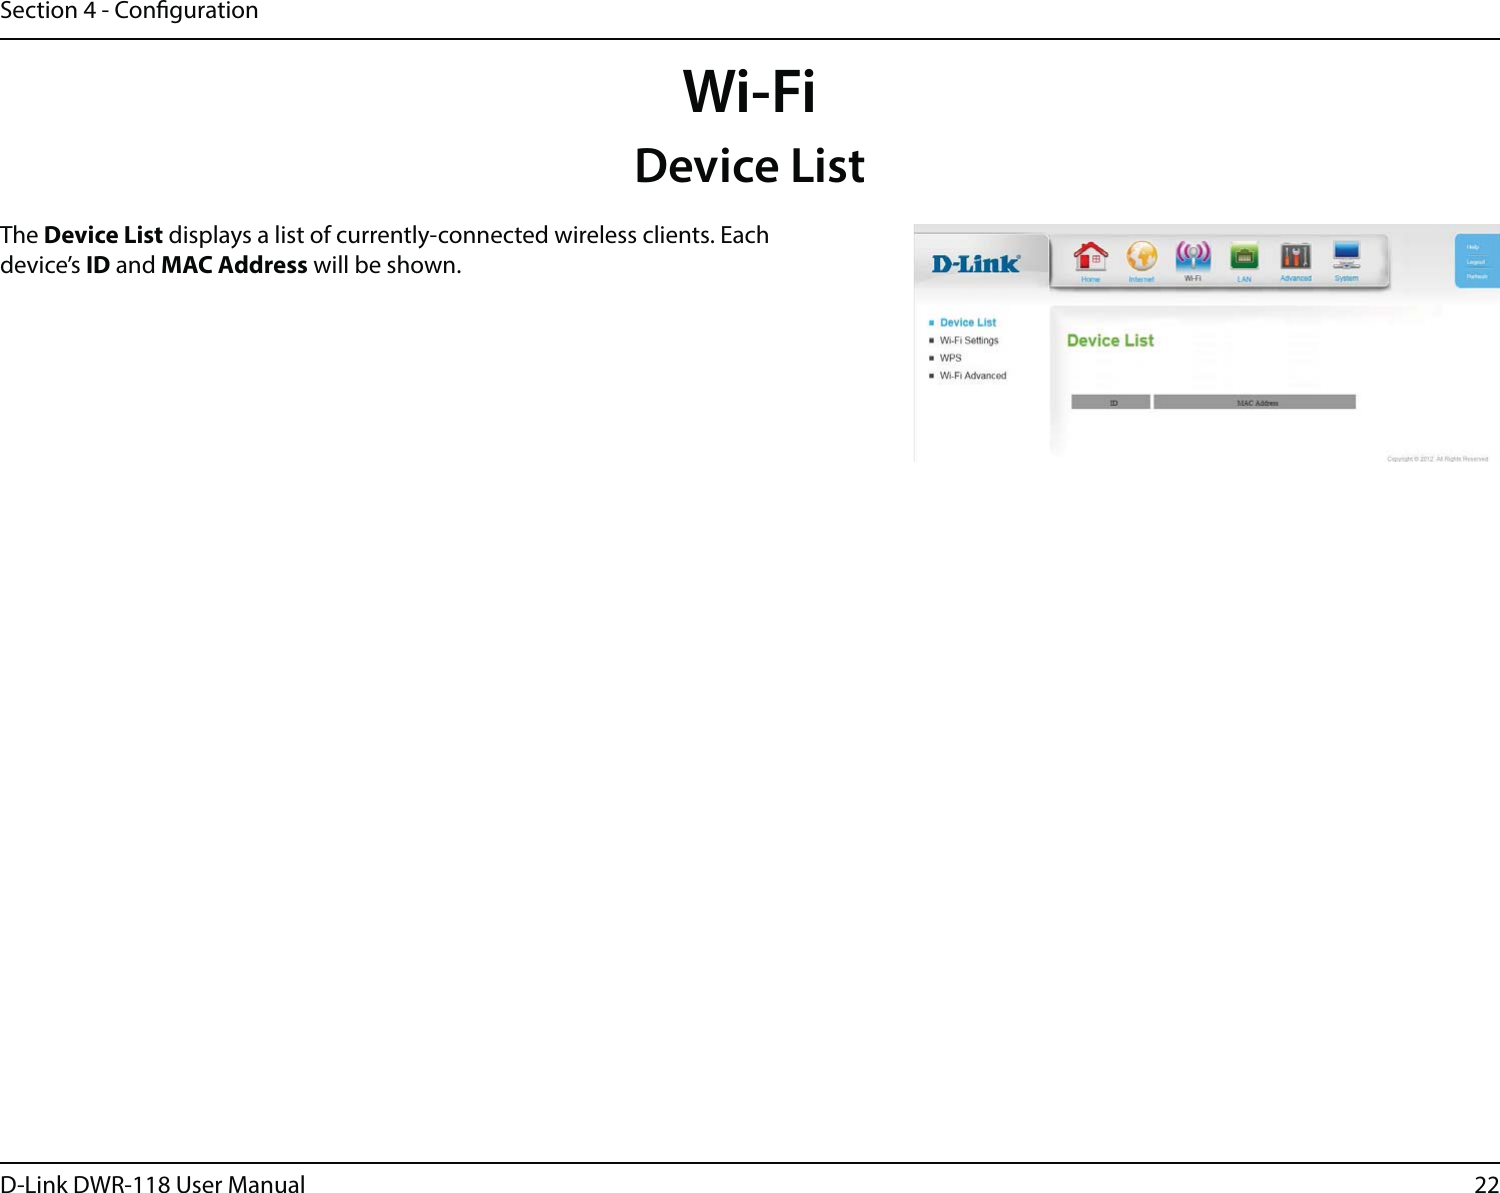 22D-Link DWR-118 User ManualSection 4 - CongurationWi-FiDevice ListThe Device List displays a list of currently-connected wireless clients. Each device’s ID and MAC Address will be shown.